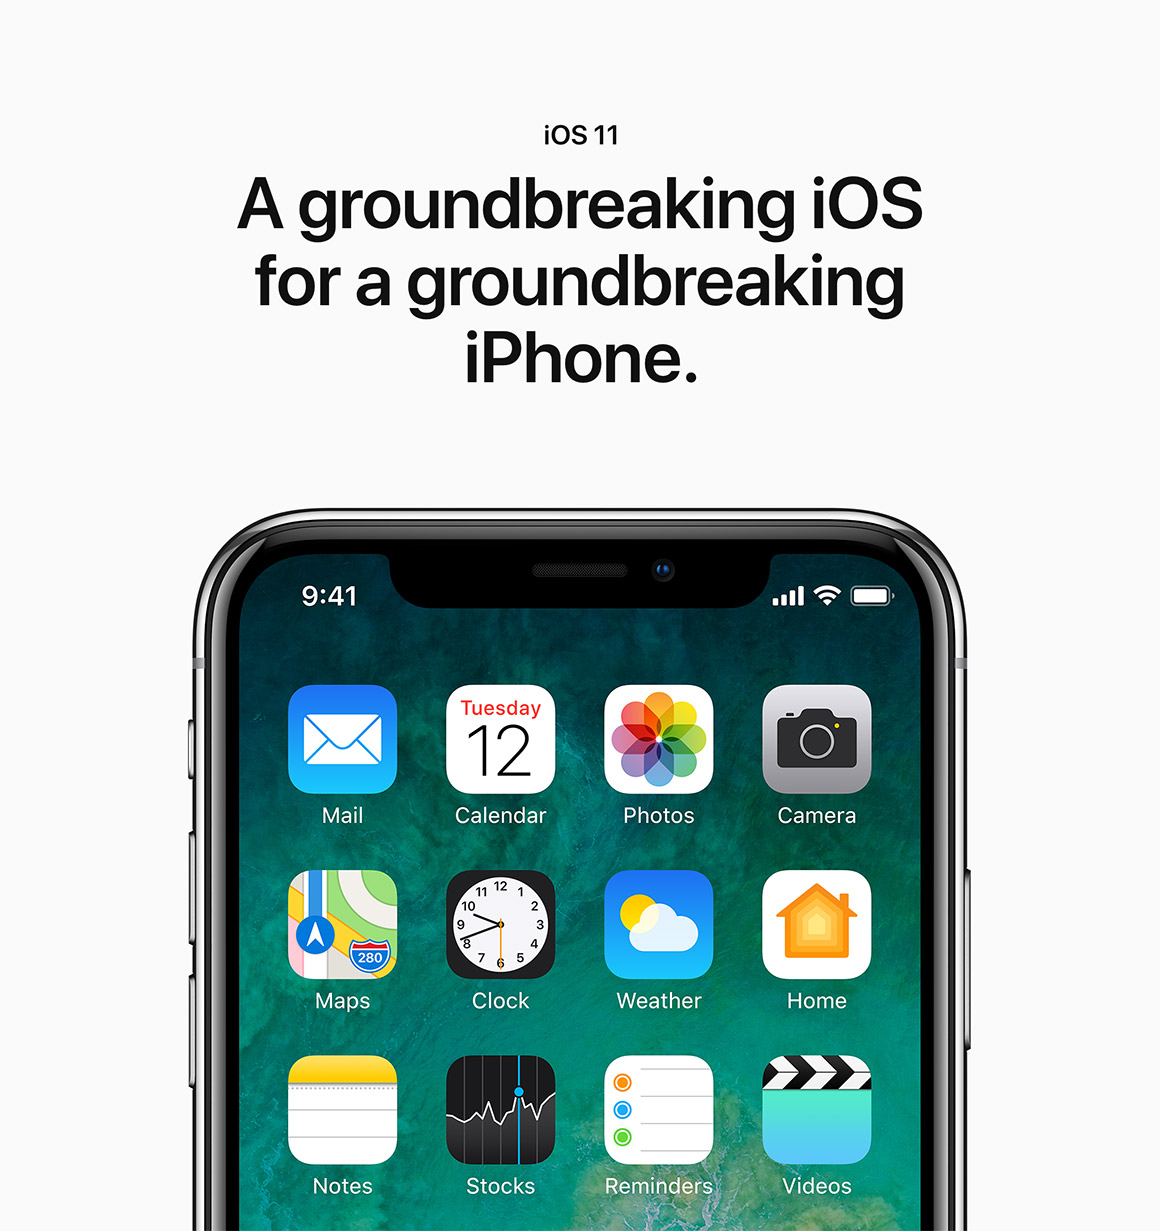 A groundbreaking iOS for a groundbreaking iPhone.